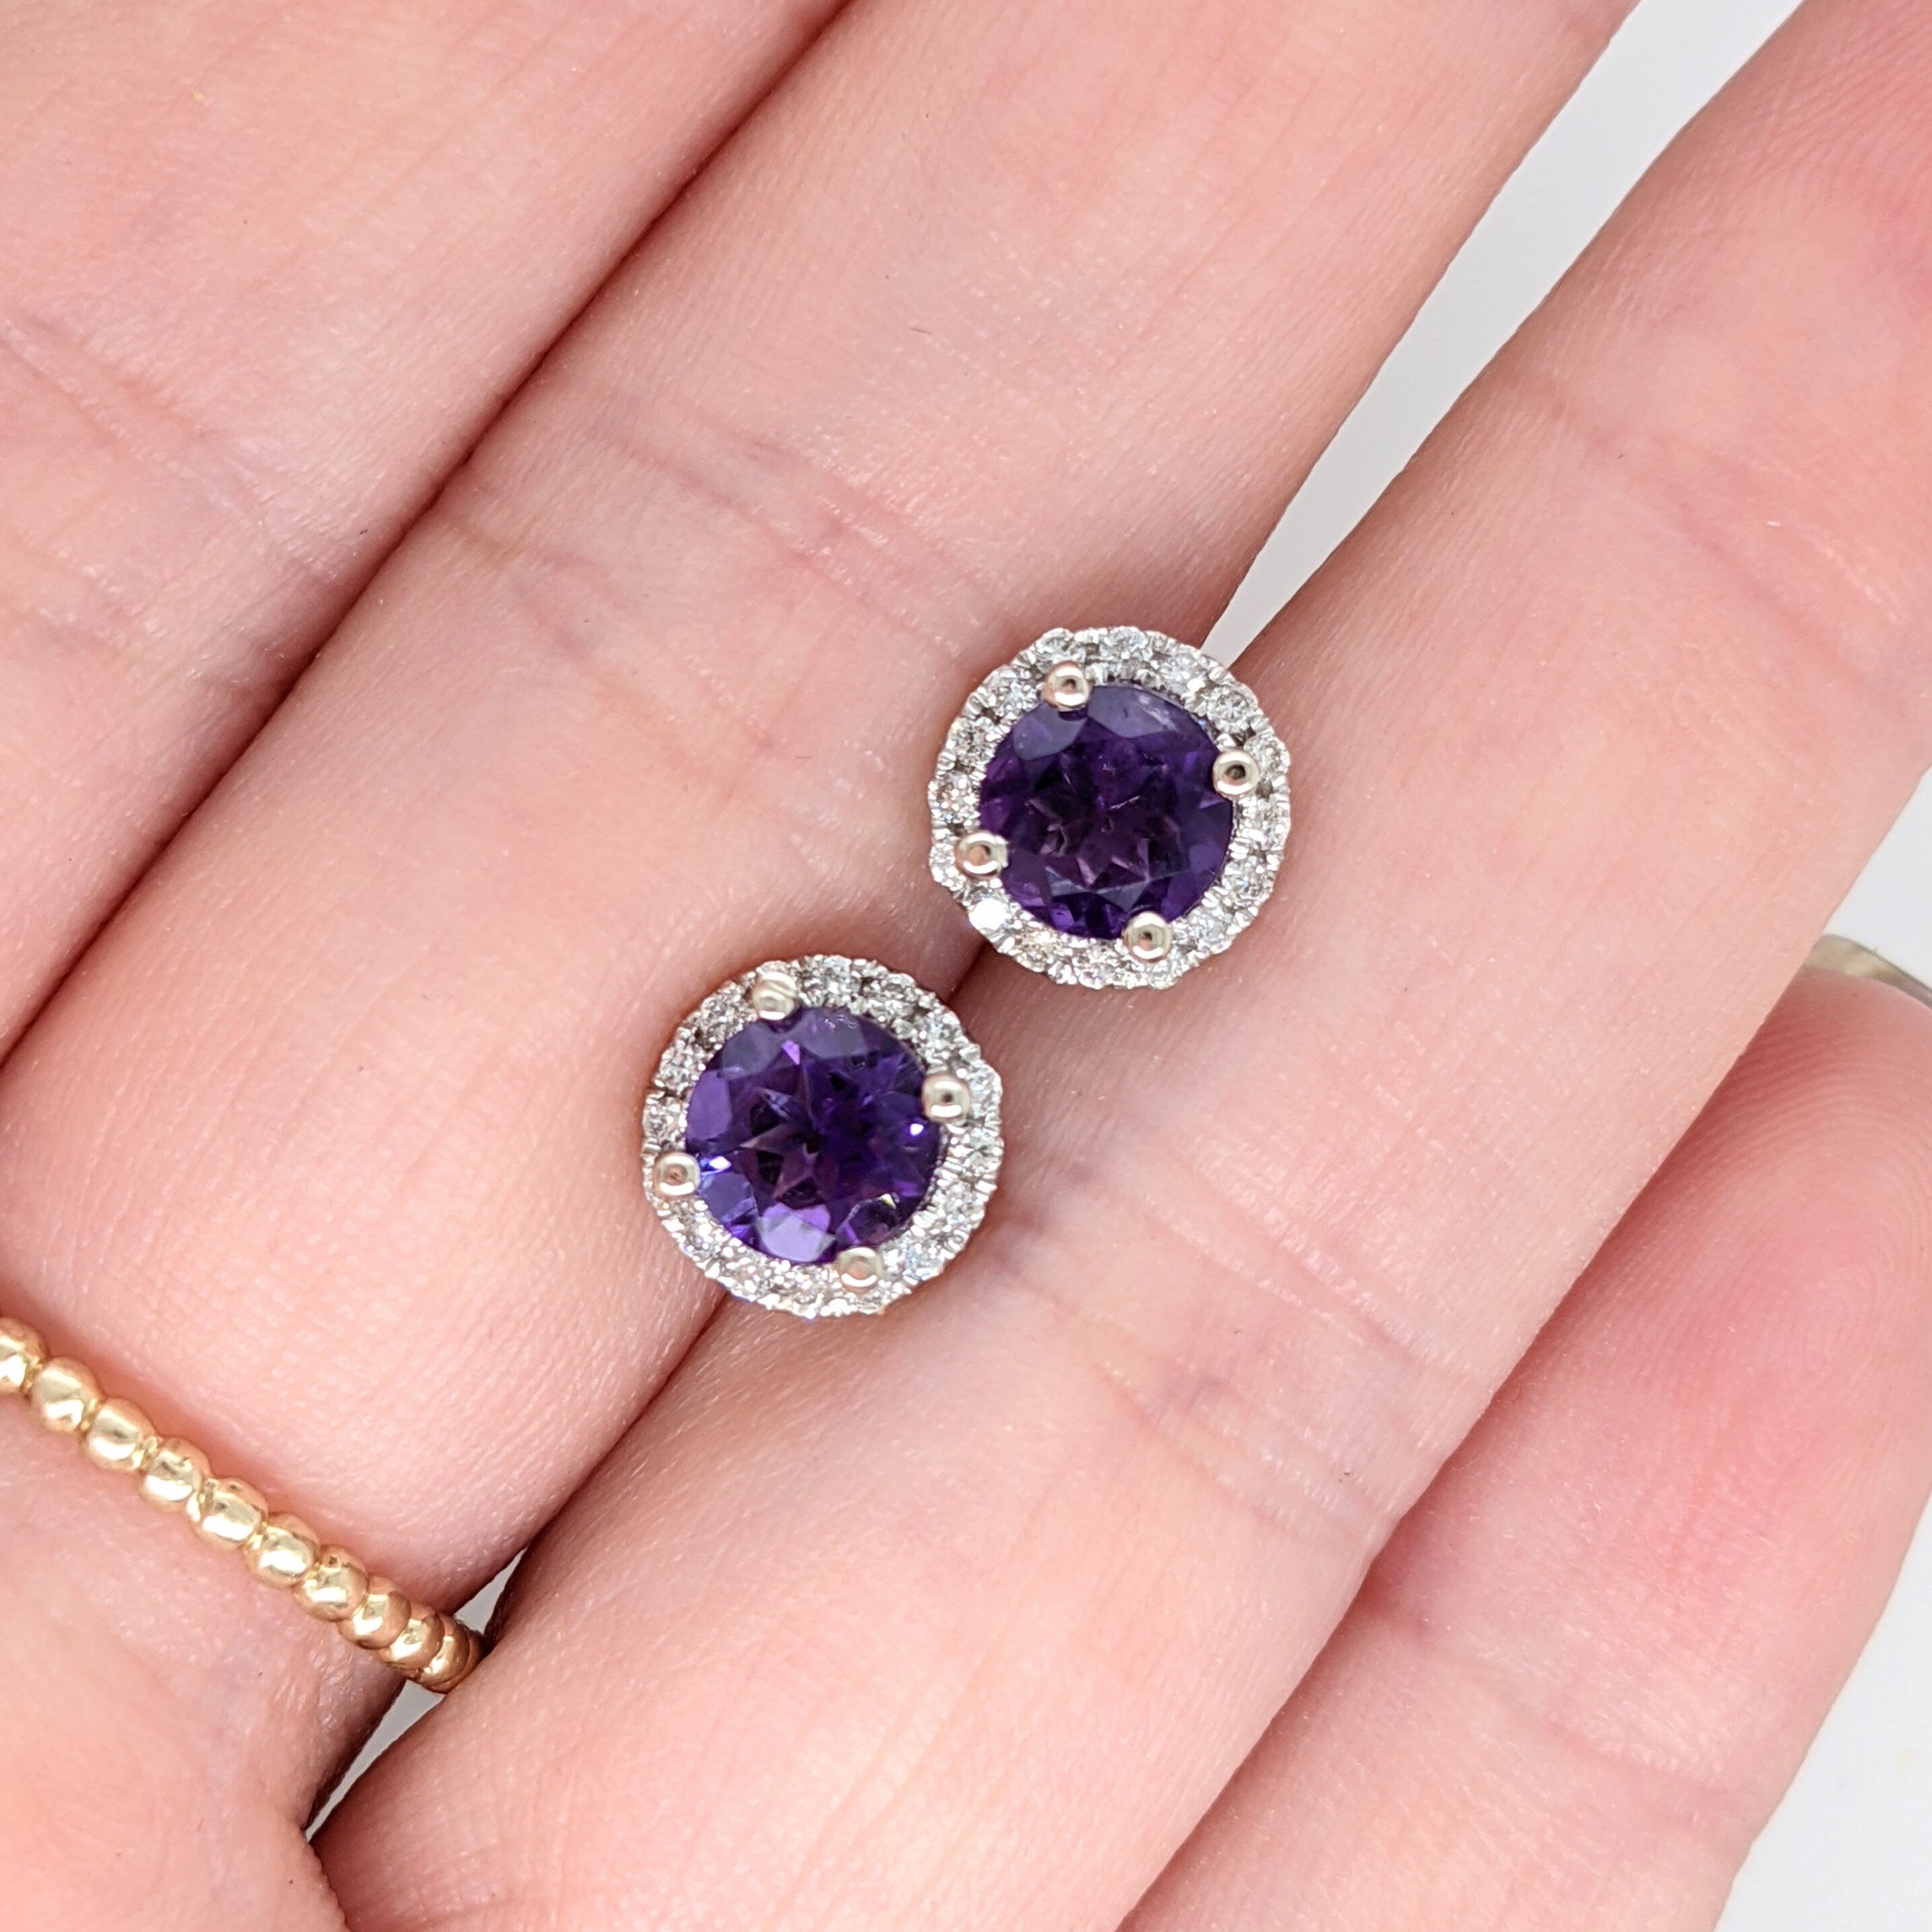 Amethyst Studs in 14K Solid Gold w a Natural Diamond Halo | Round 6mm | Prong Setting | Push Back | February Birthstone | Purple Earrings